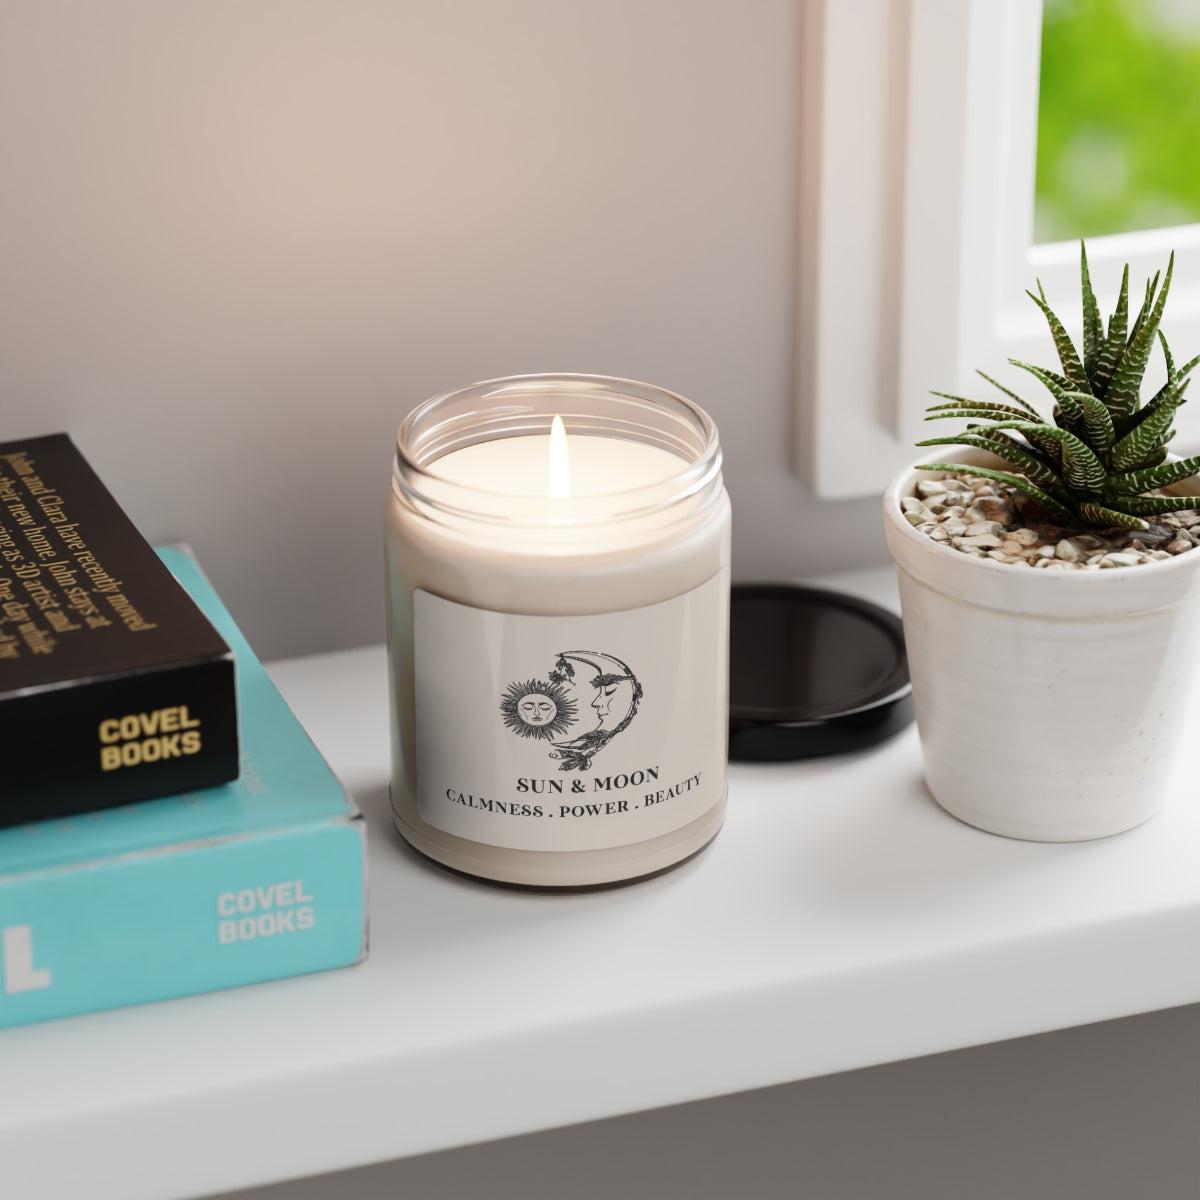 Sun & Moon Scented Candle